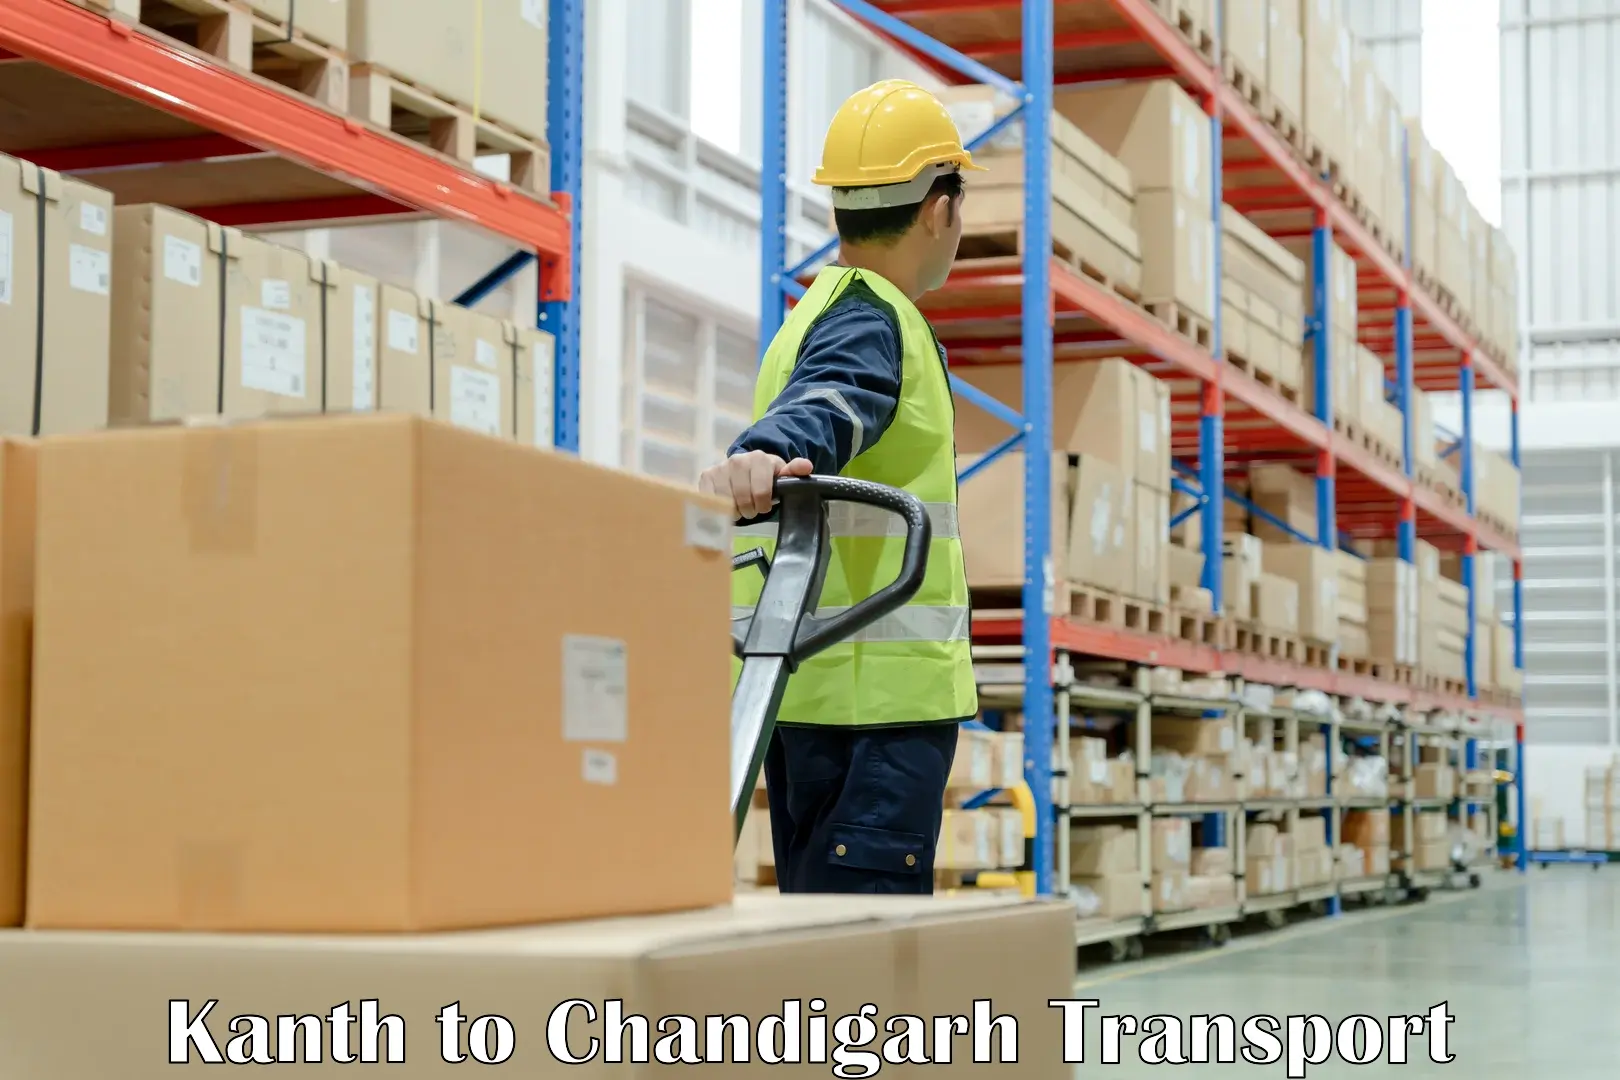 Vehicle transport services in Kanth to Chandigarh